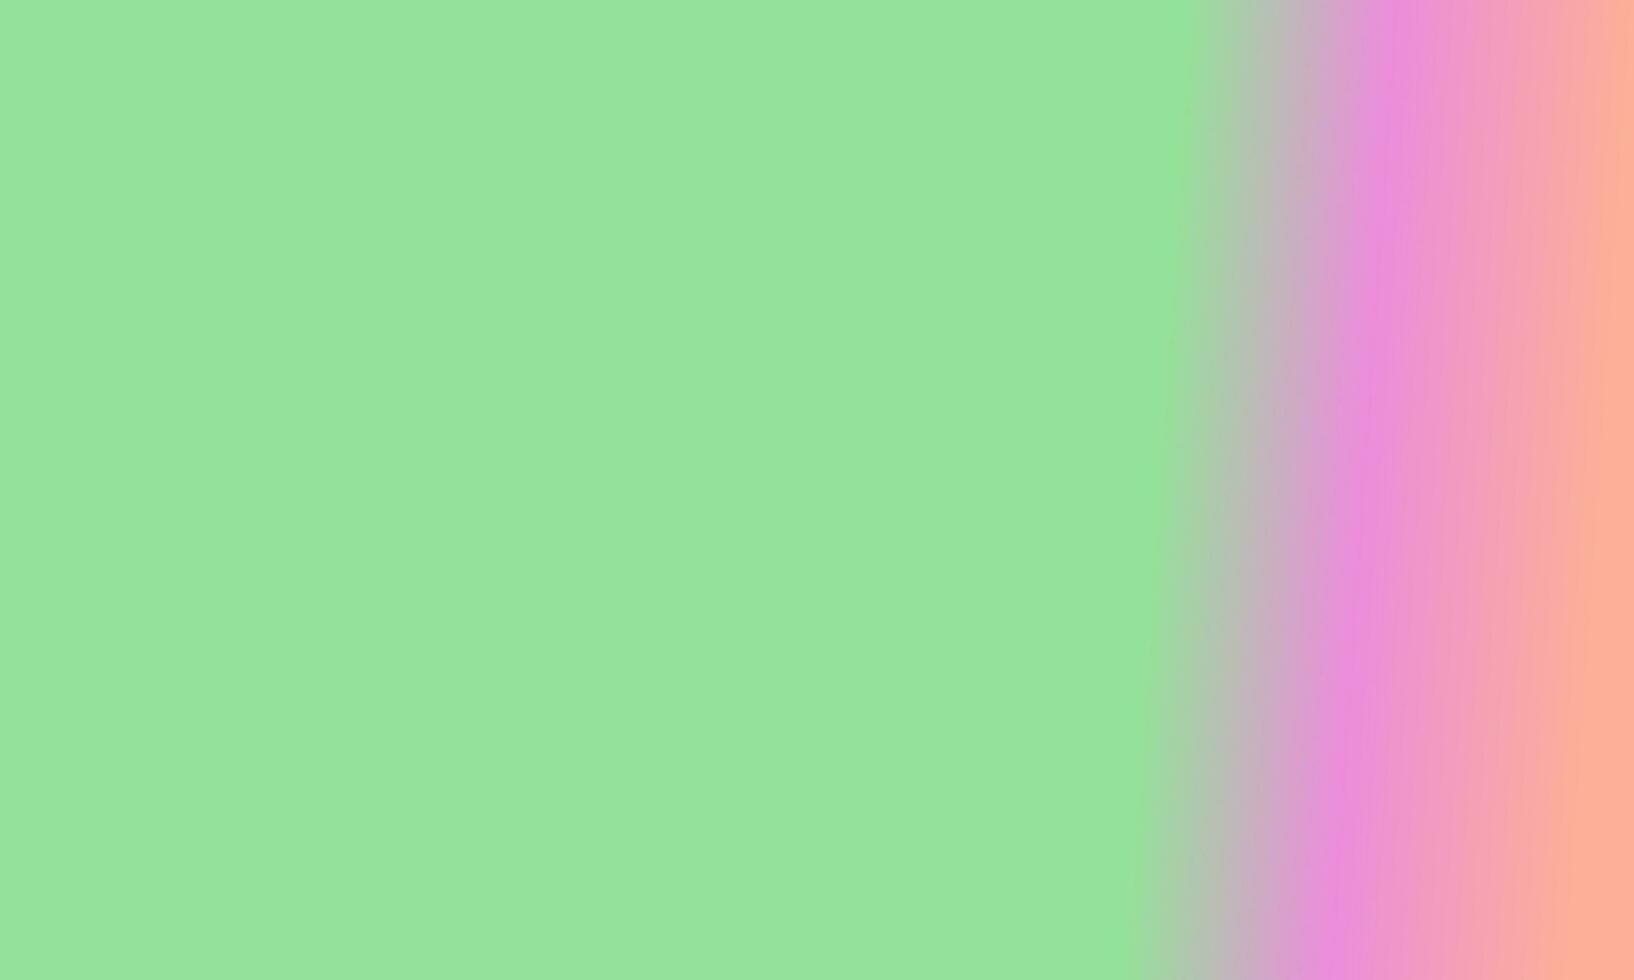 Design simple peach,green and pink gradient color illustration background photo